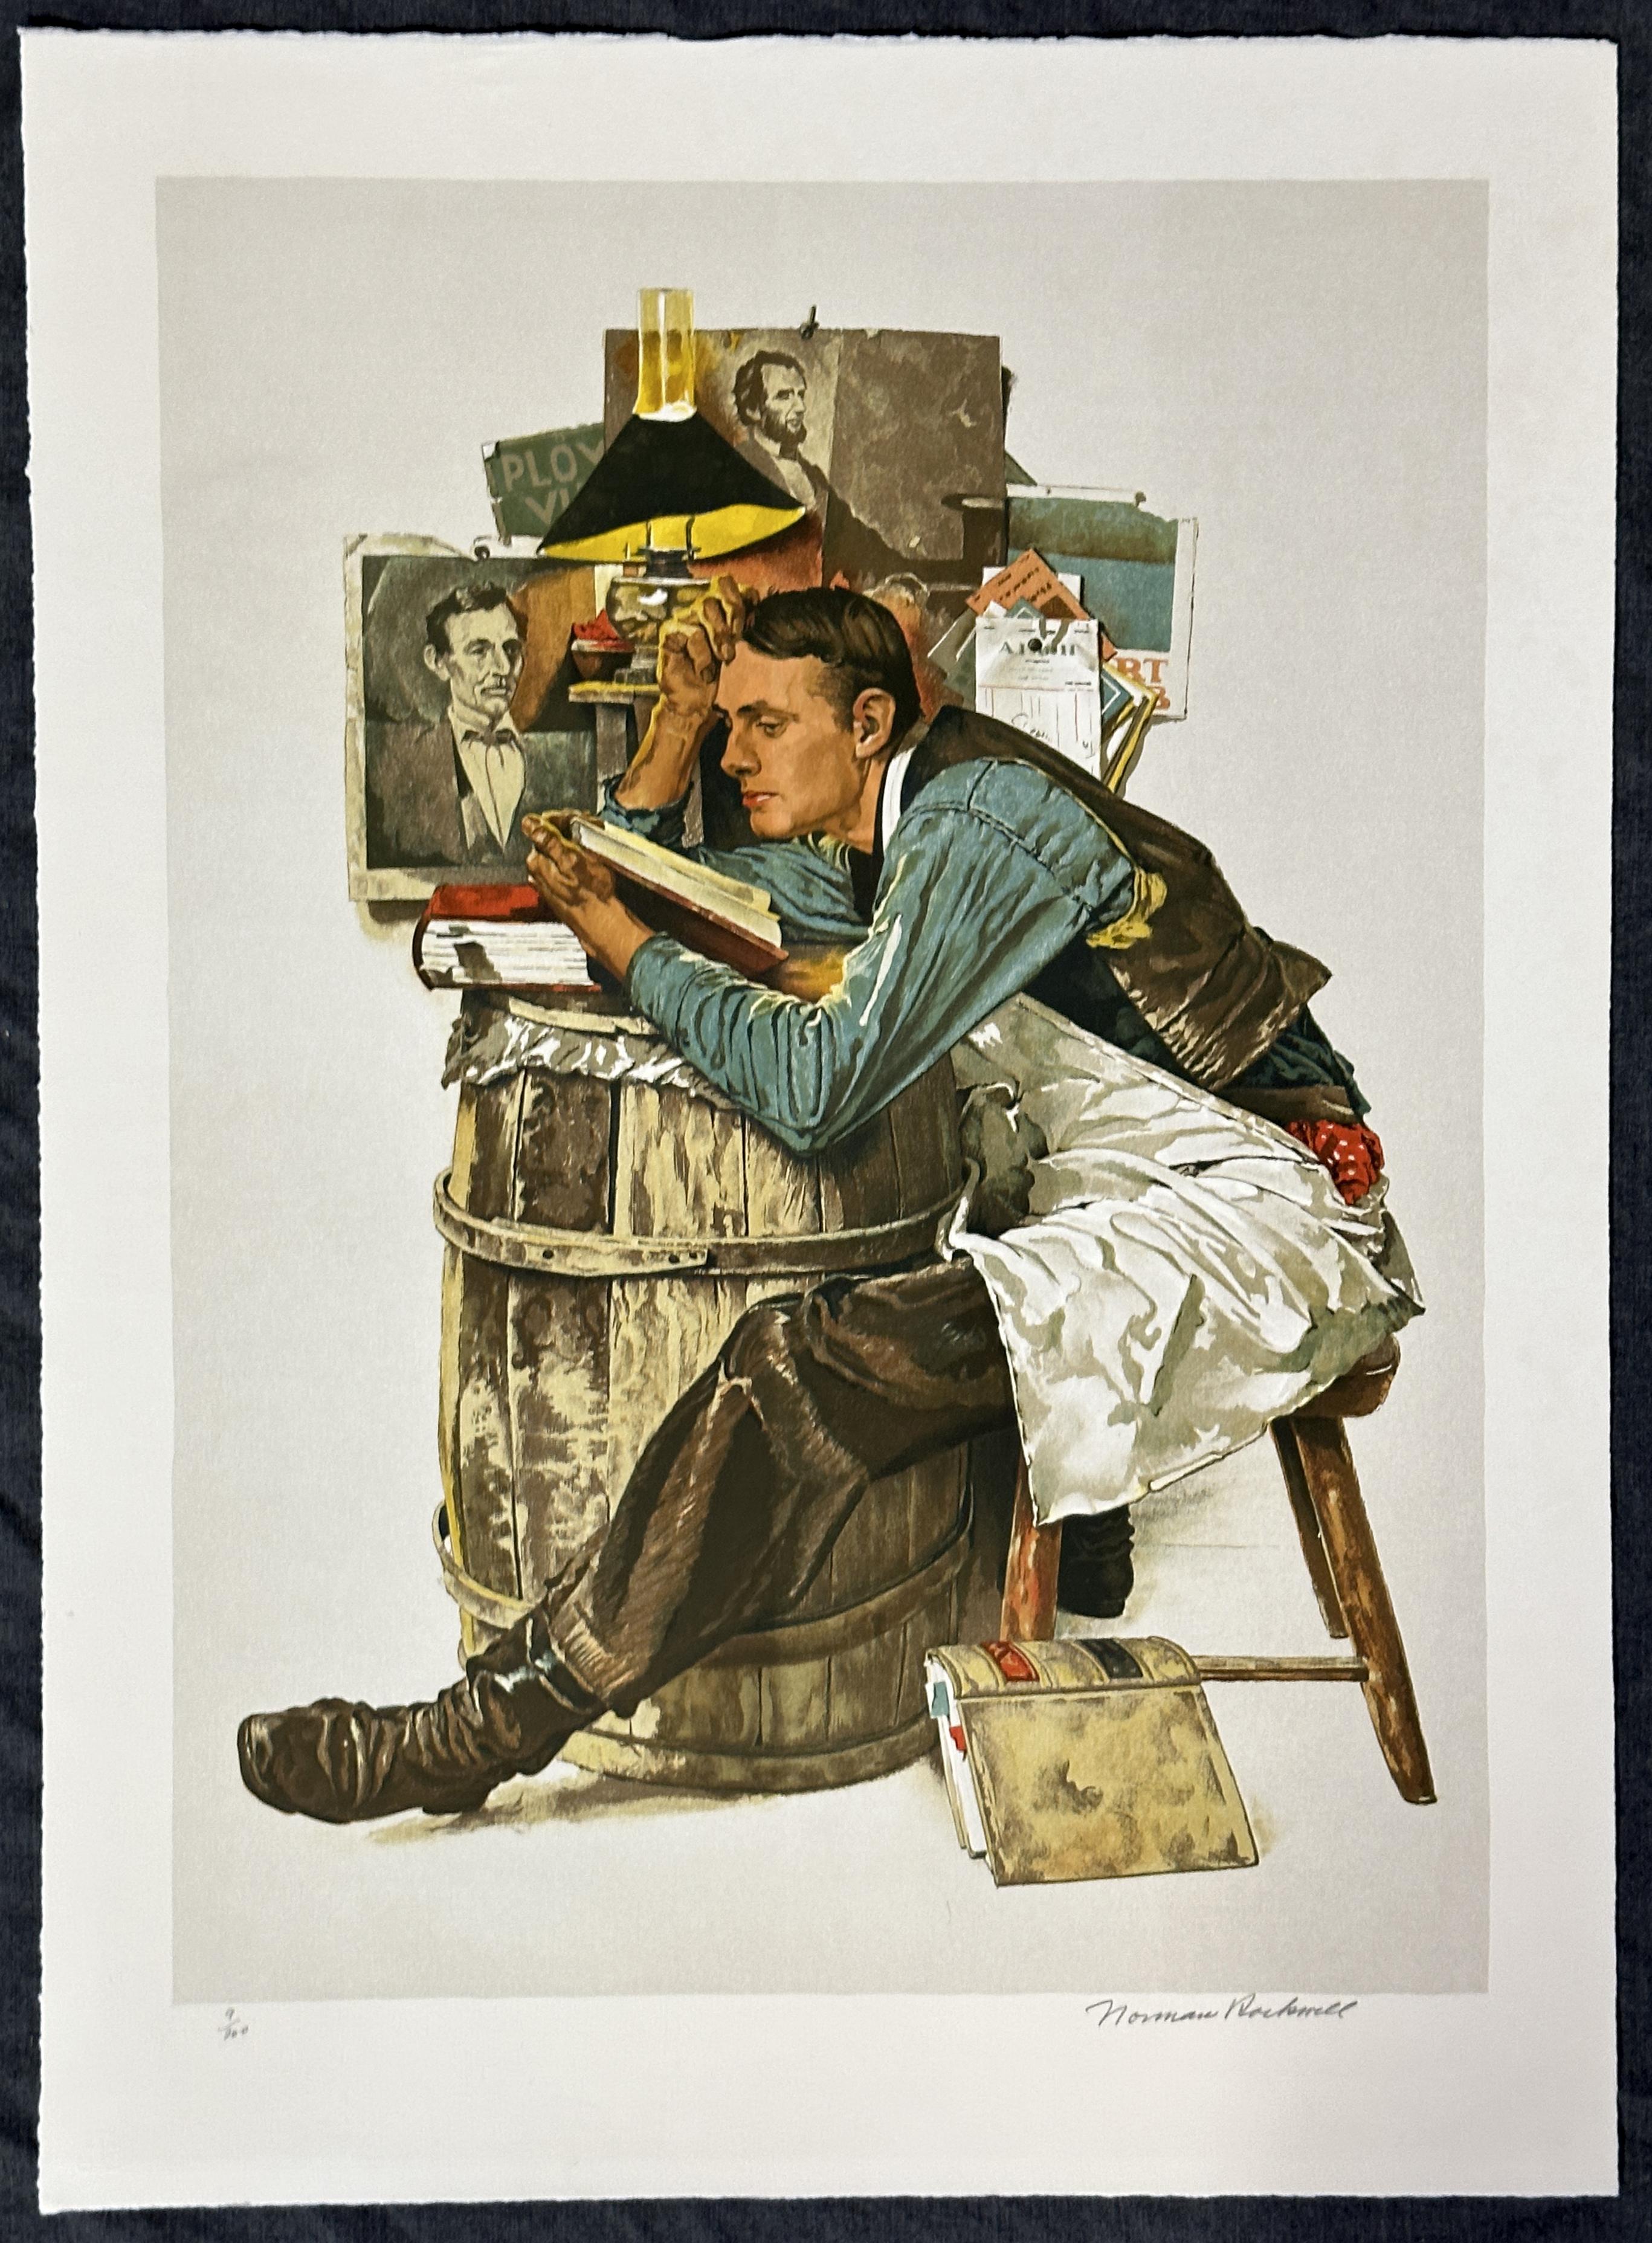  Law Student 1976 Signed Limited Edition Lithograph  - Print by Norman Rockwell